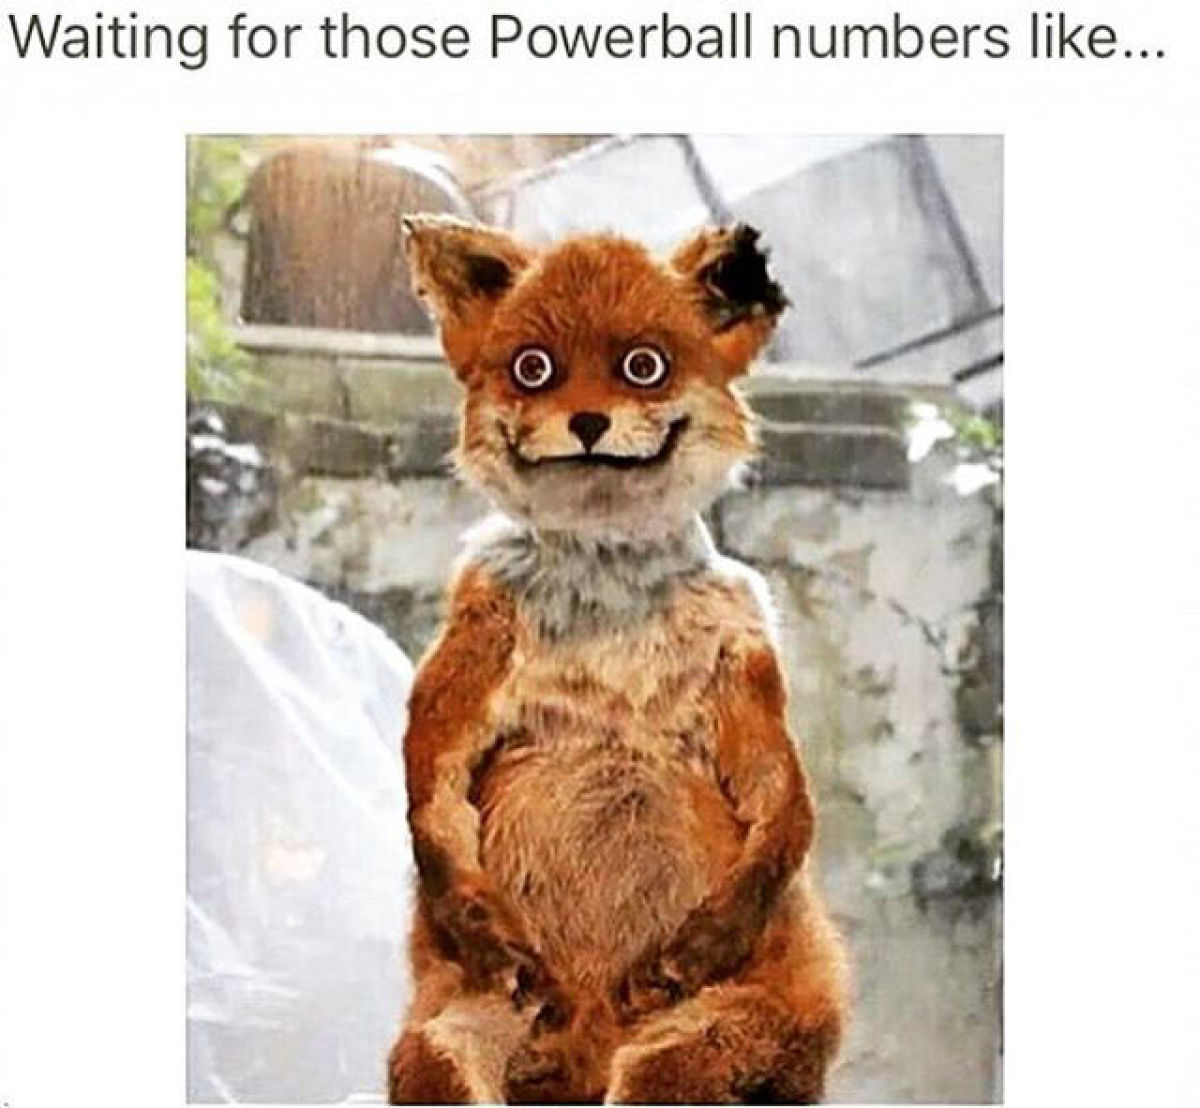 lowkey wanna die - Waiting for those Powerball numbers ... O O